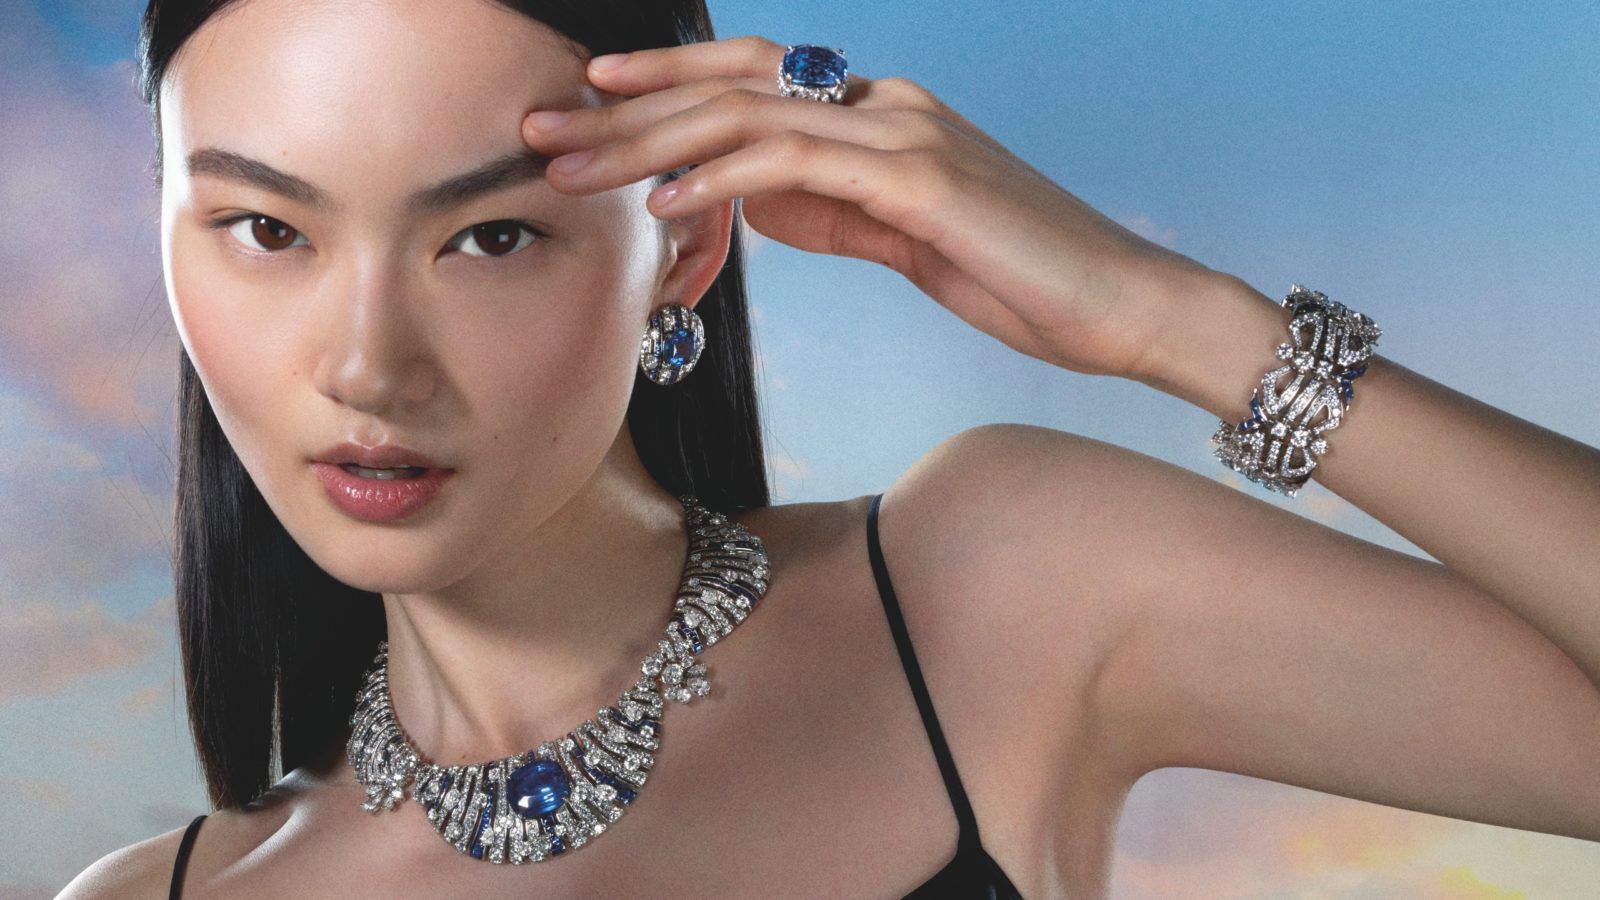 Bvlgari’s new Magnifica High Jewellery collection is a dazzling, resplendent affair